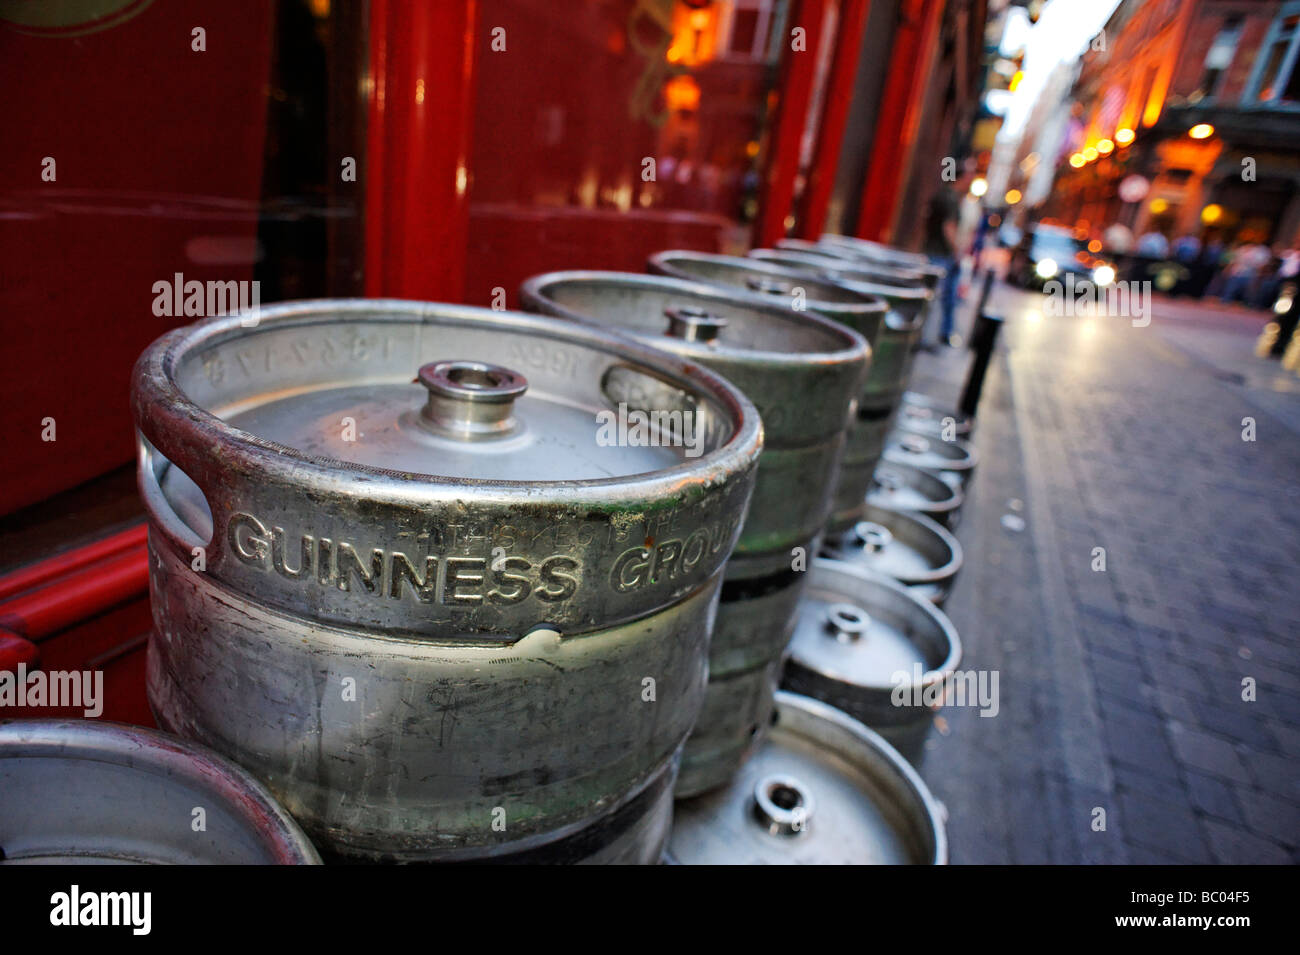 Rows of empty Guinness barrels stacked up in an alleyway outside a pub Dublin Republic of Ireland Stock Photo